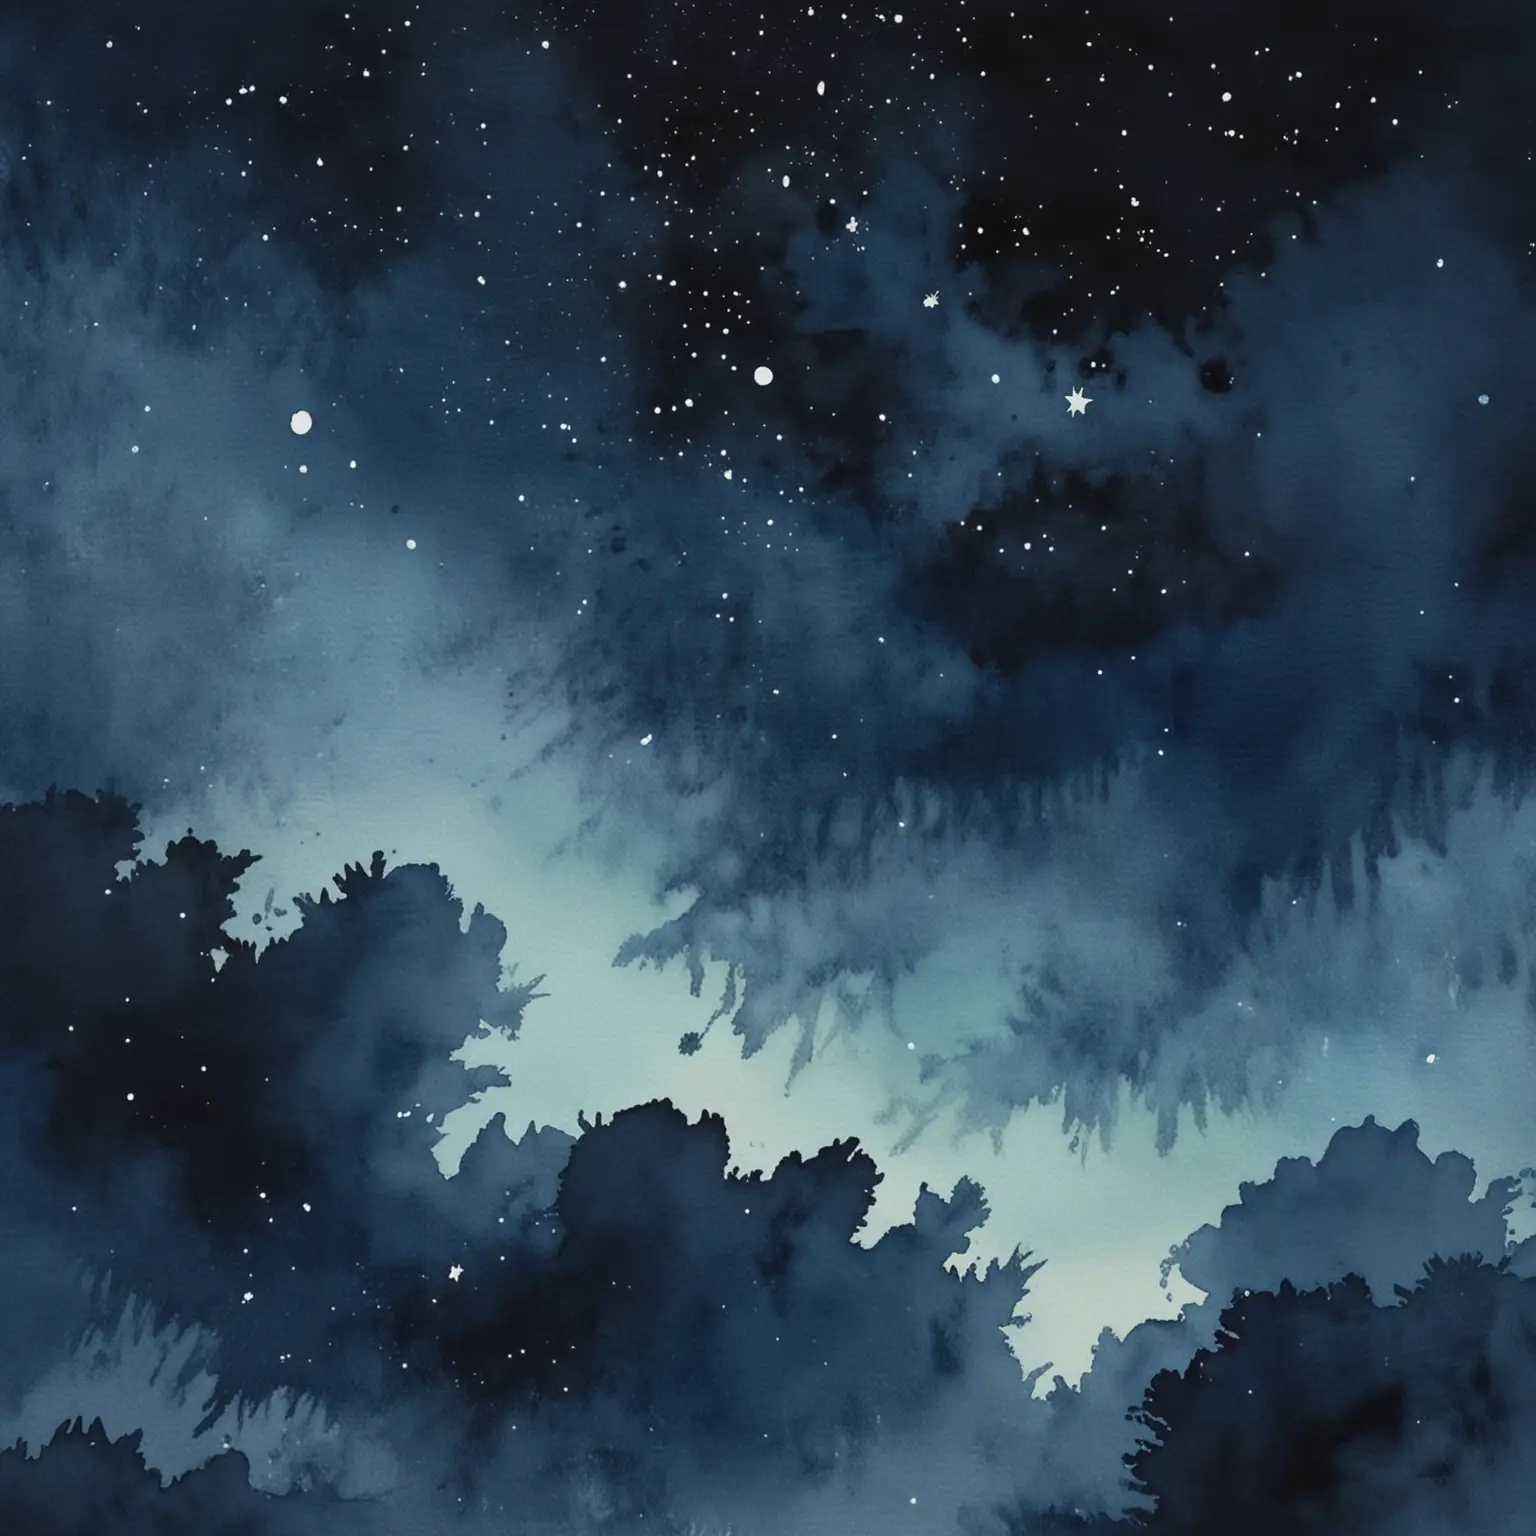 watercolor of a dark blue 
night sky that would be popular for a book about sleep

